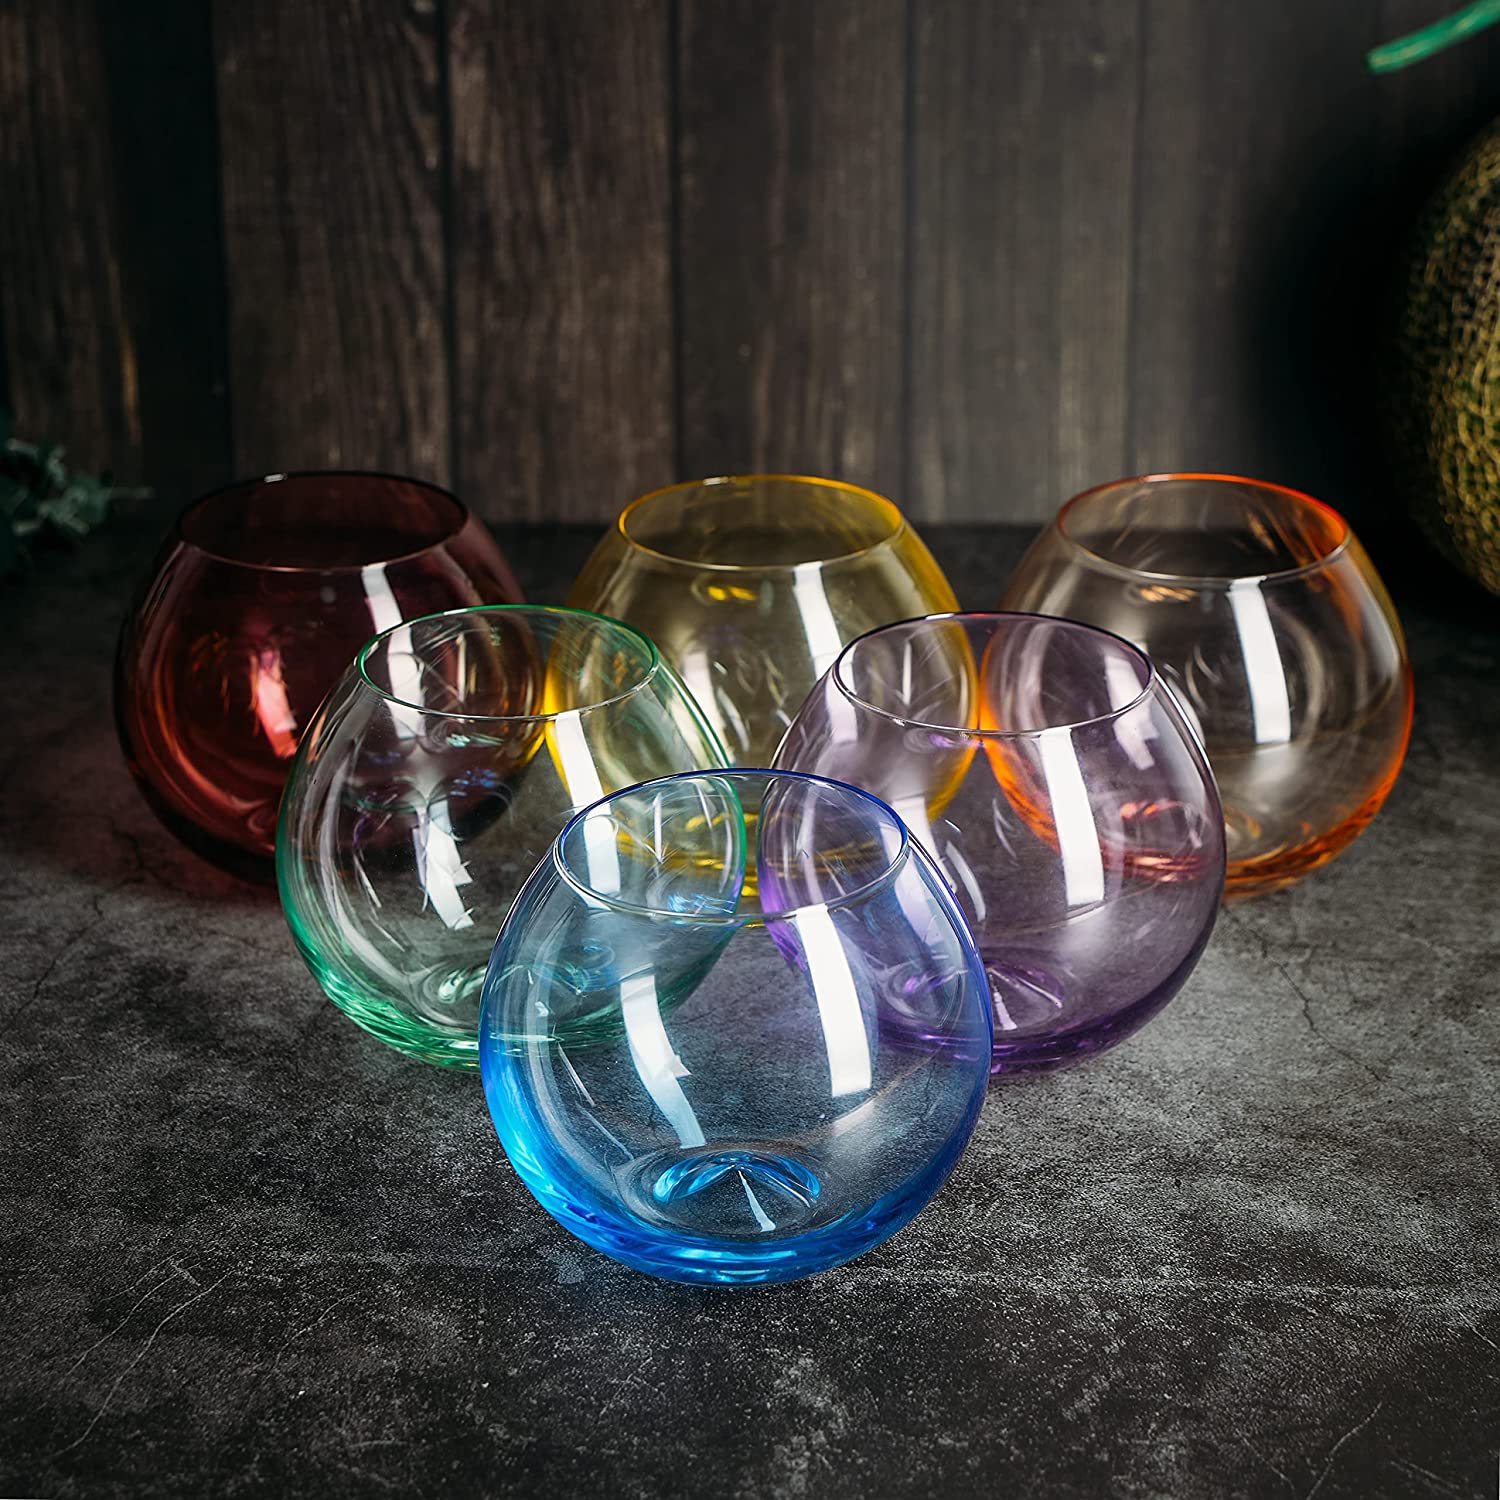 Renaissance Stained Glass Rainbow Stemmed Wine Glasses - Set of 2 - 12 – NA  Deal Depot